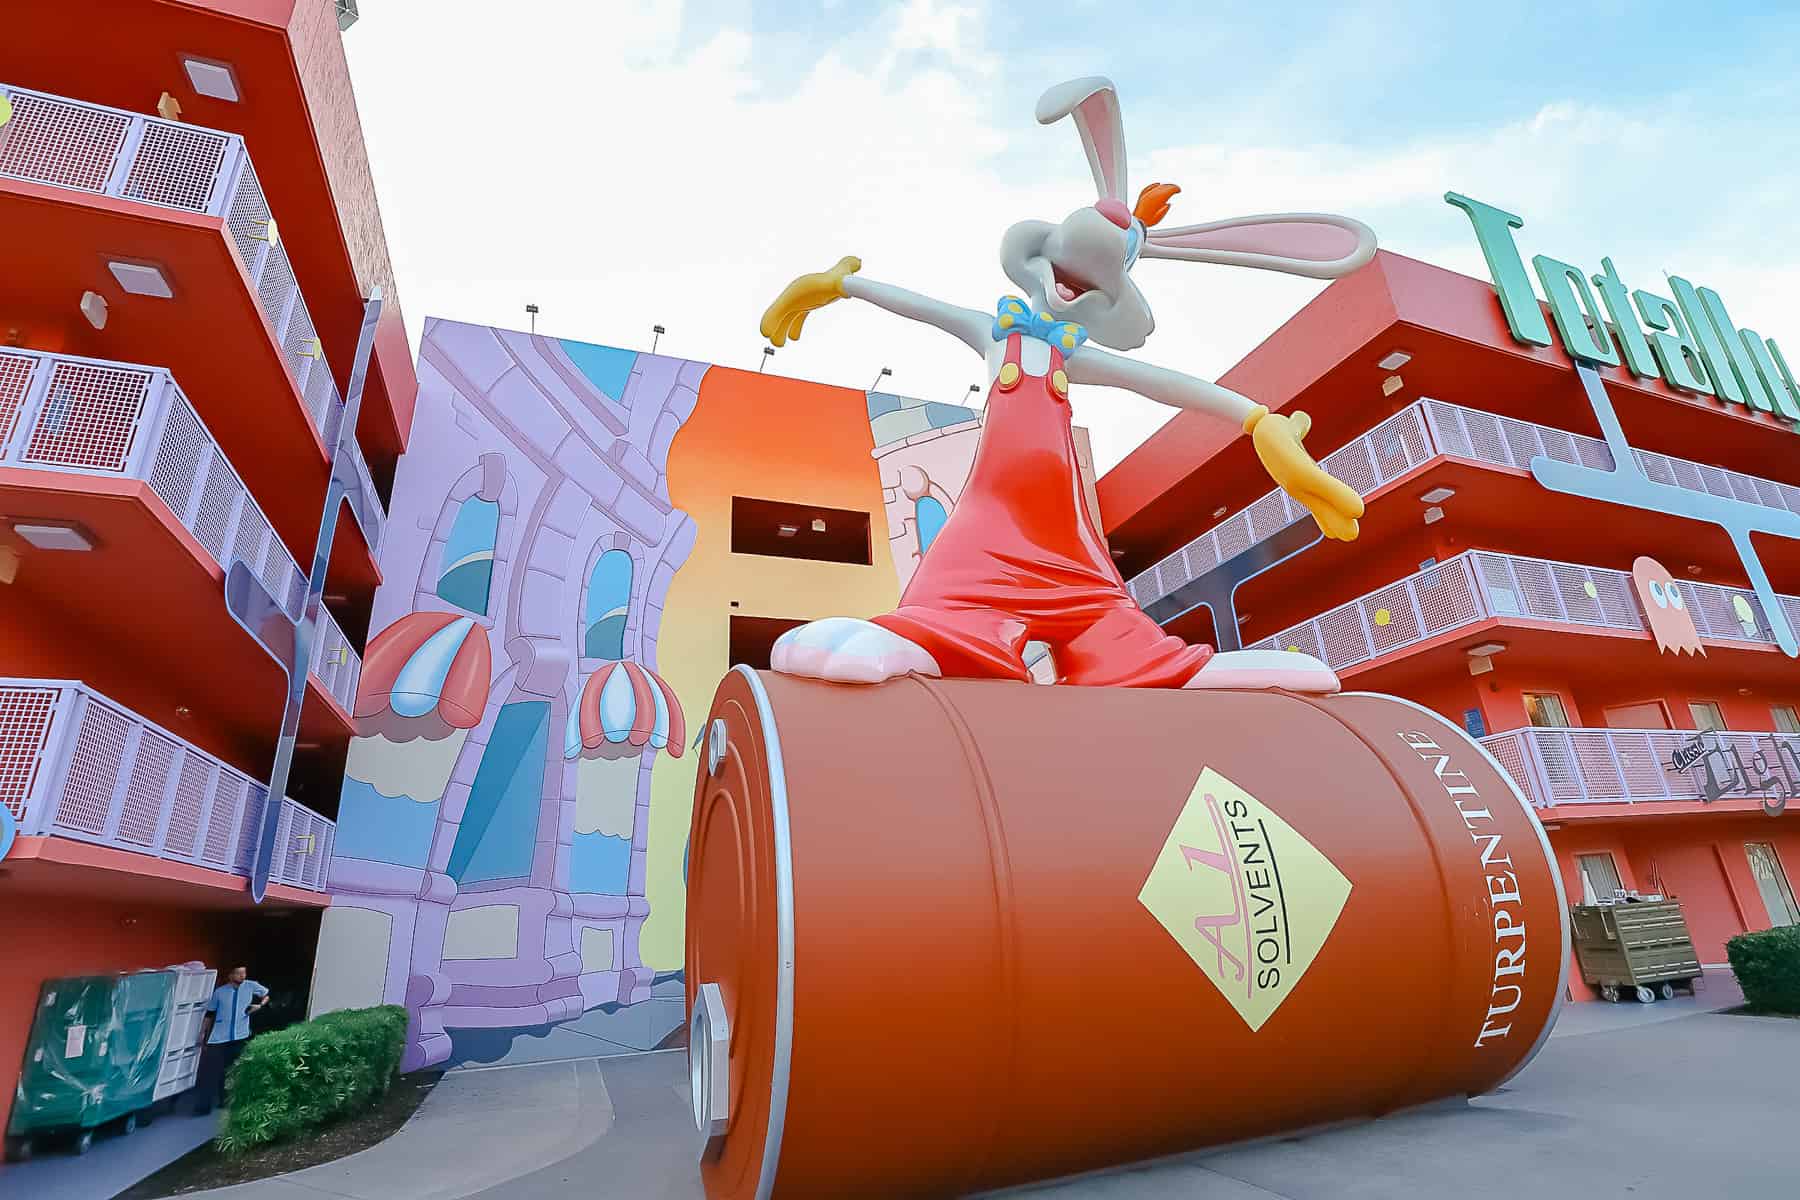 Roger Rabbit on a faux can of turpentine at Pop Century